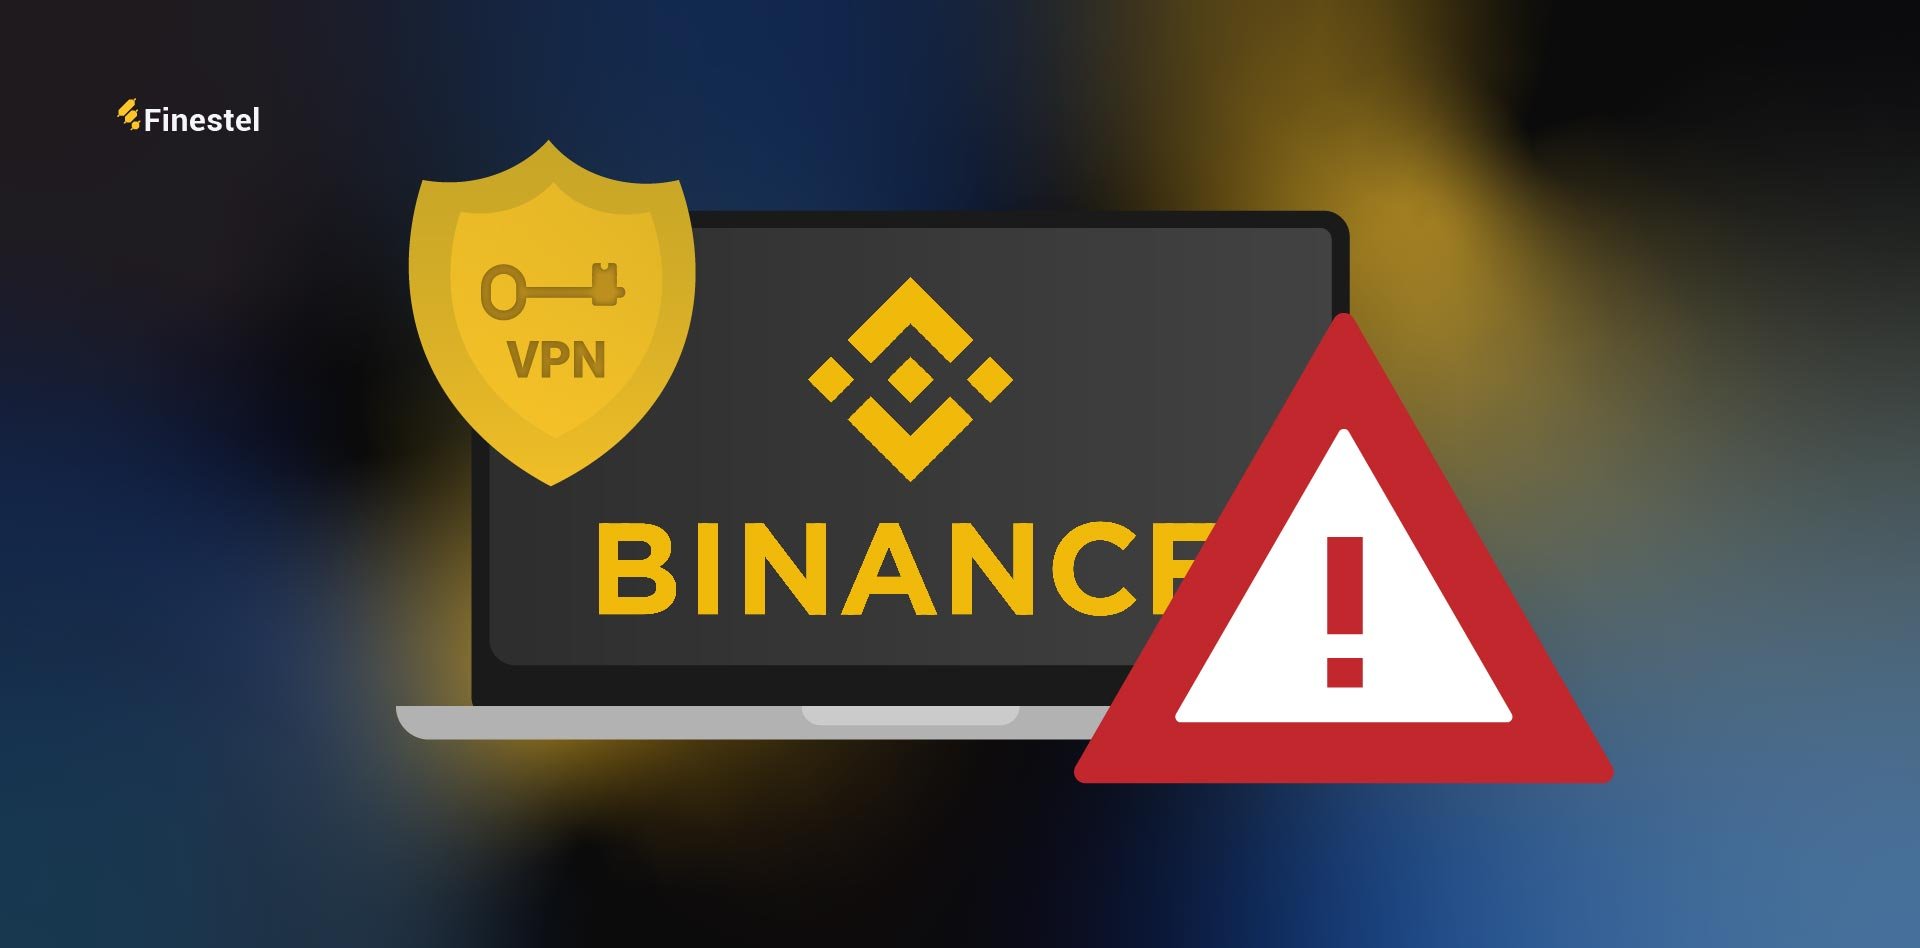 How to access Binance in banned countries